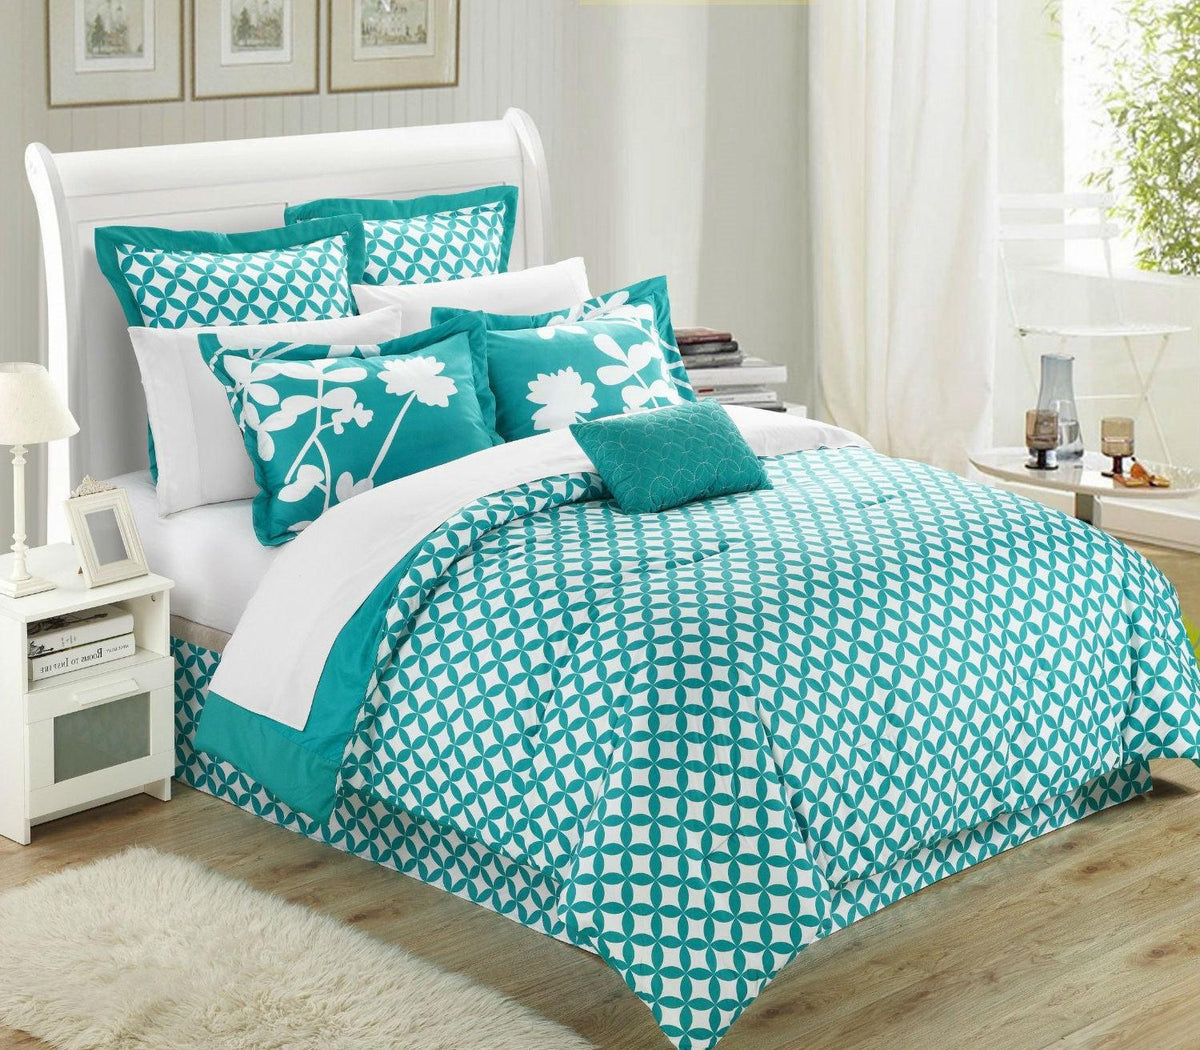 Queen size Turquoise 7-Piece Floral Bed in a Bag Comforter Set - beddingbag.com